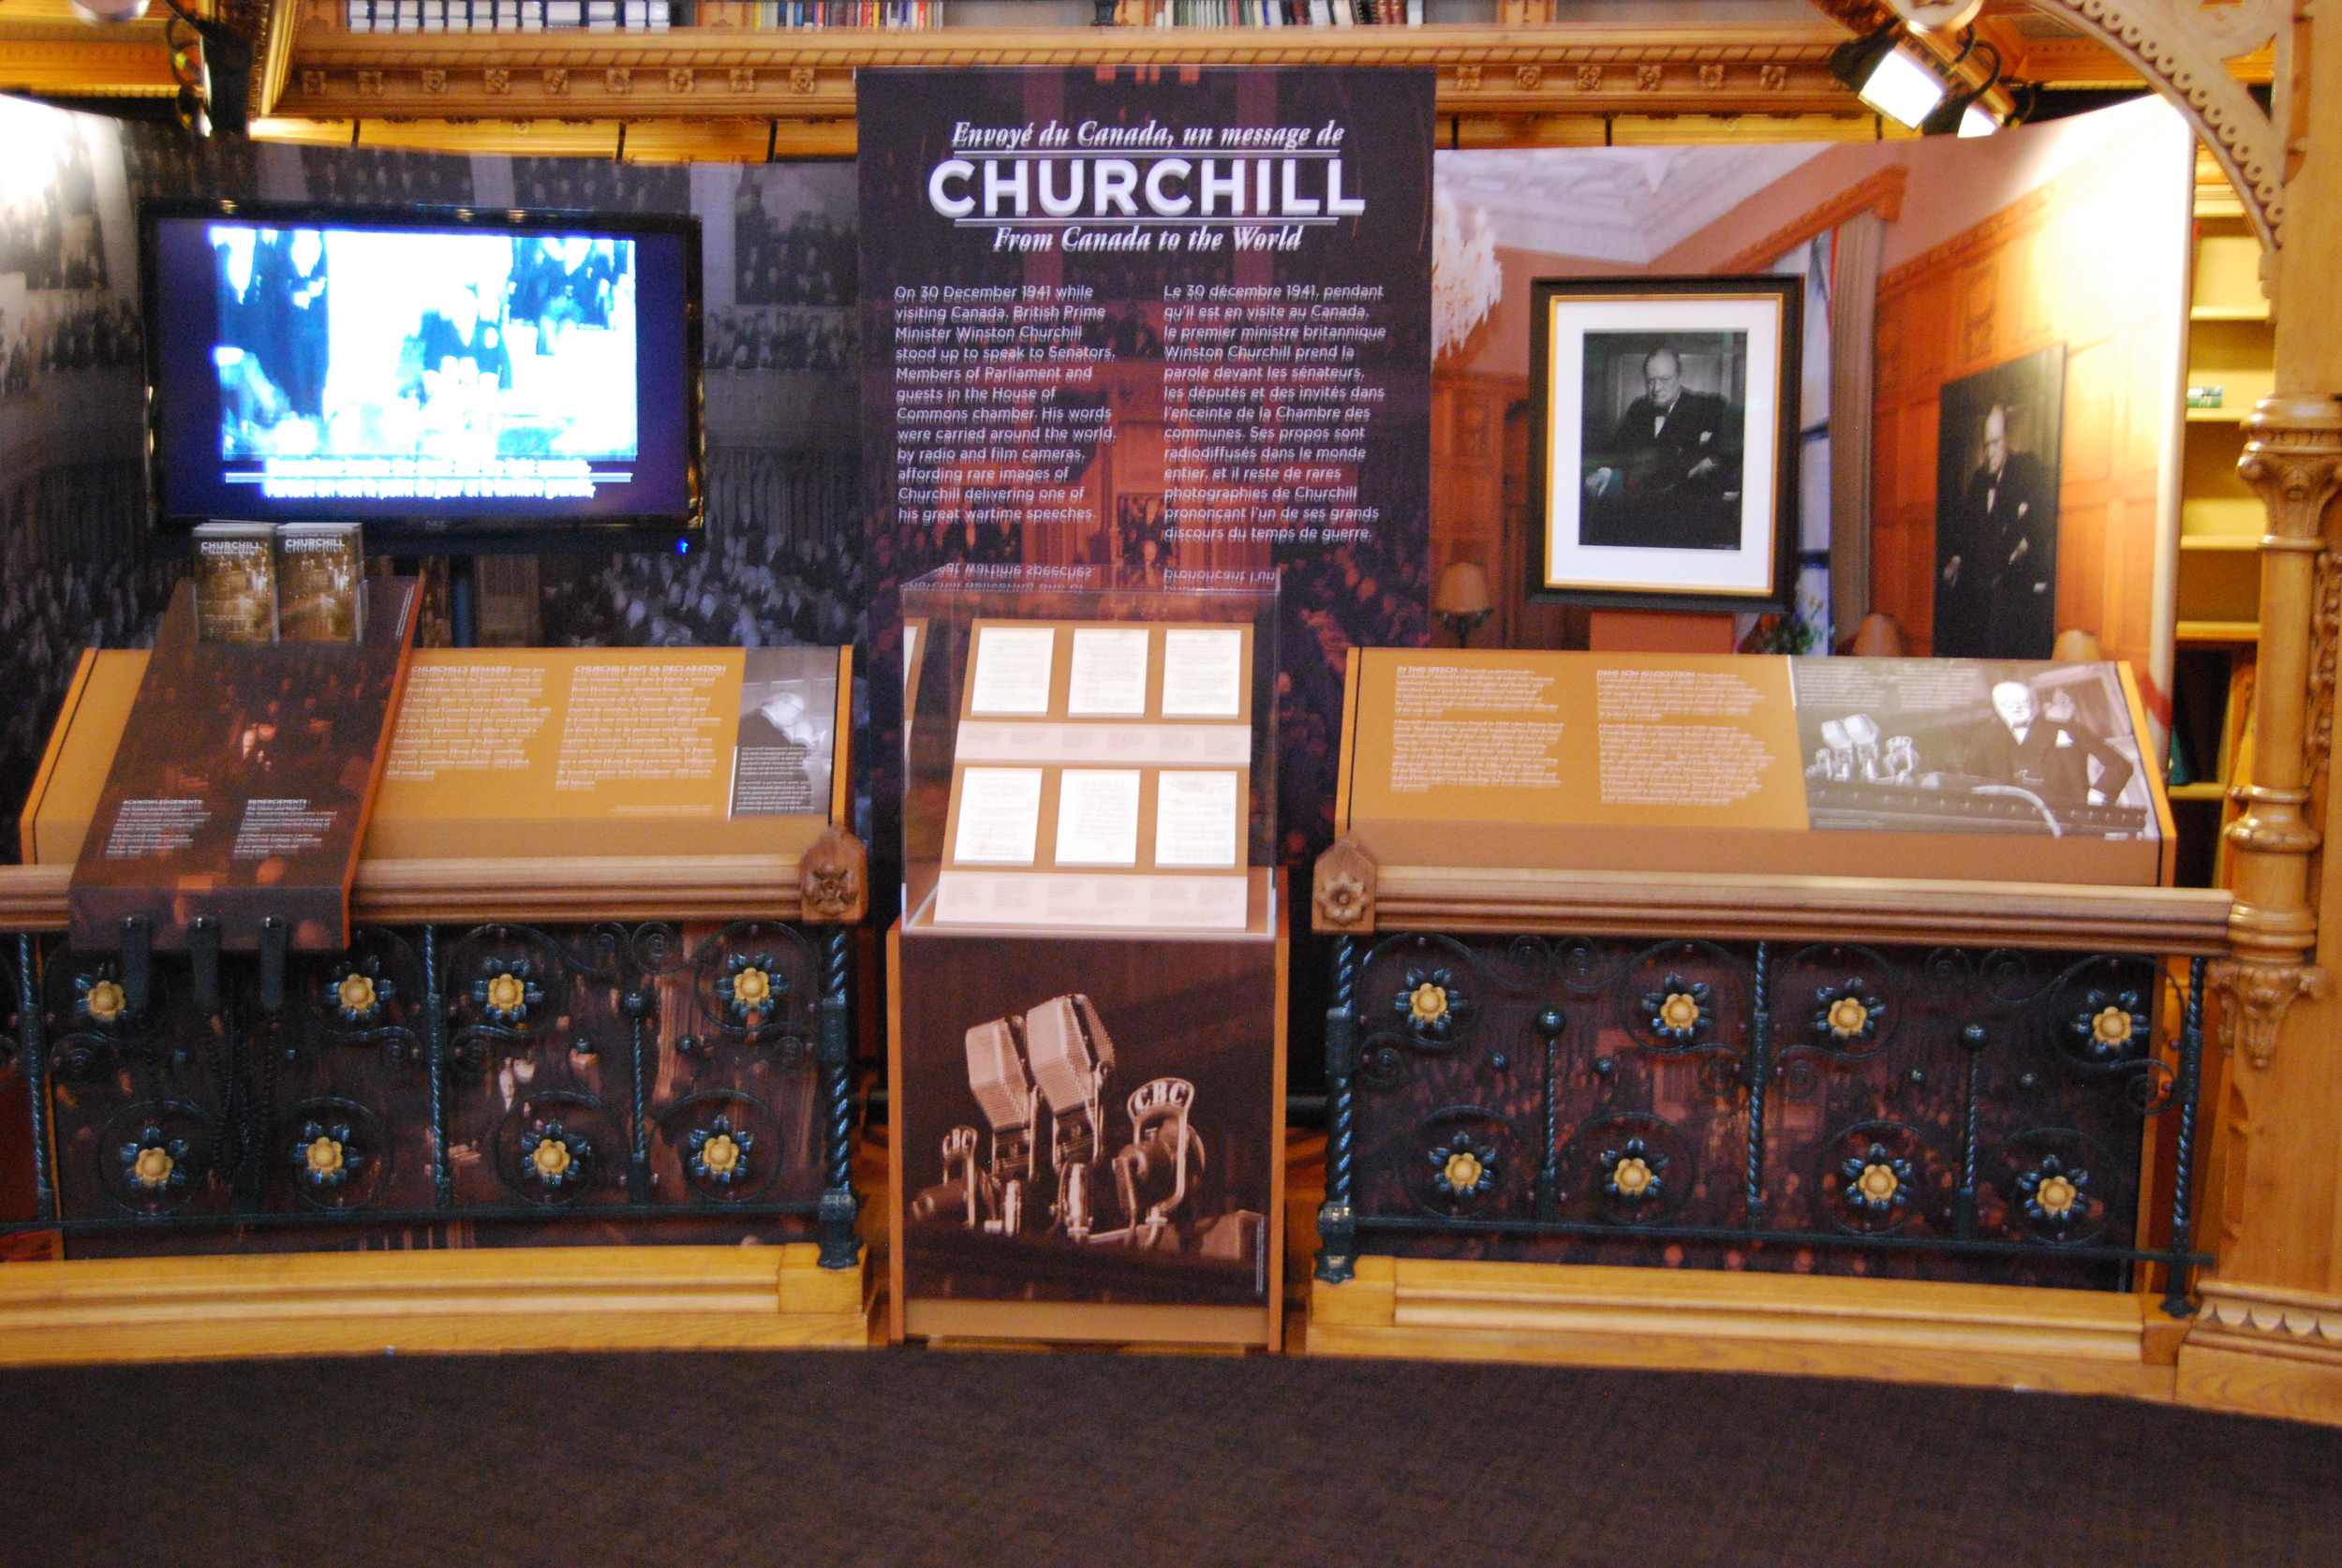 The Exhibit in the Library of Parliament